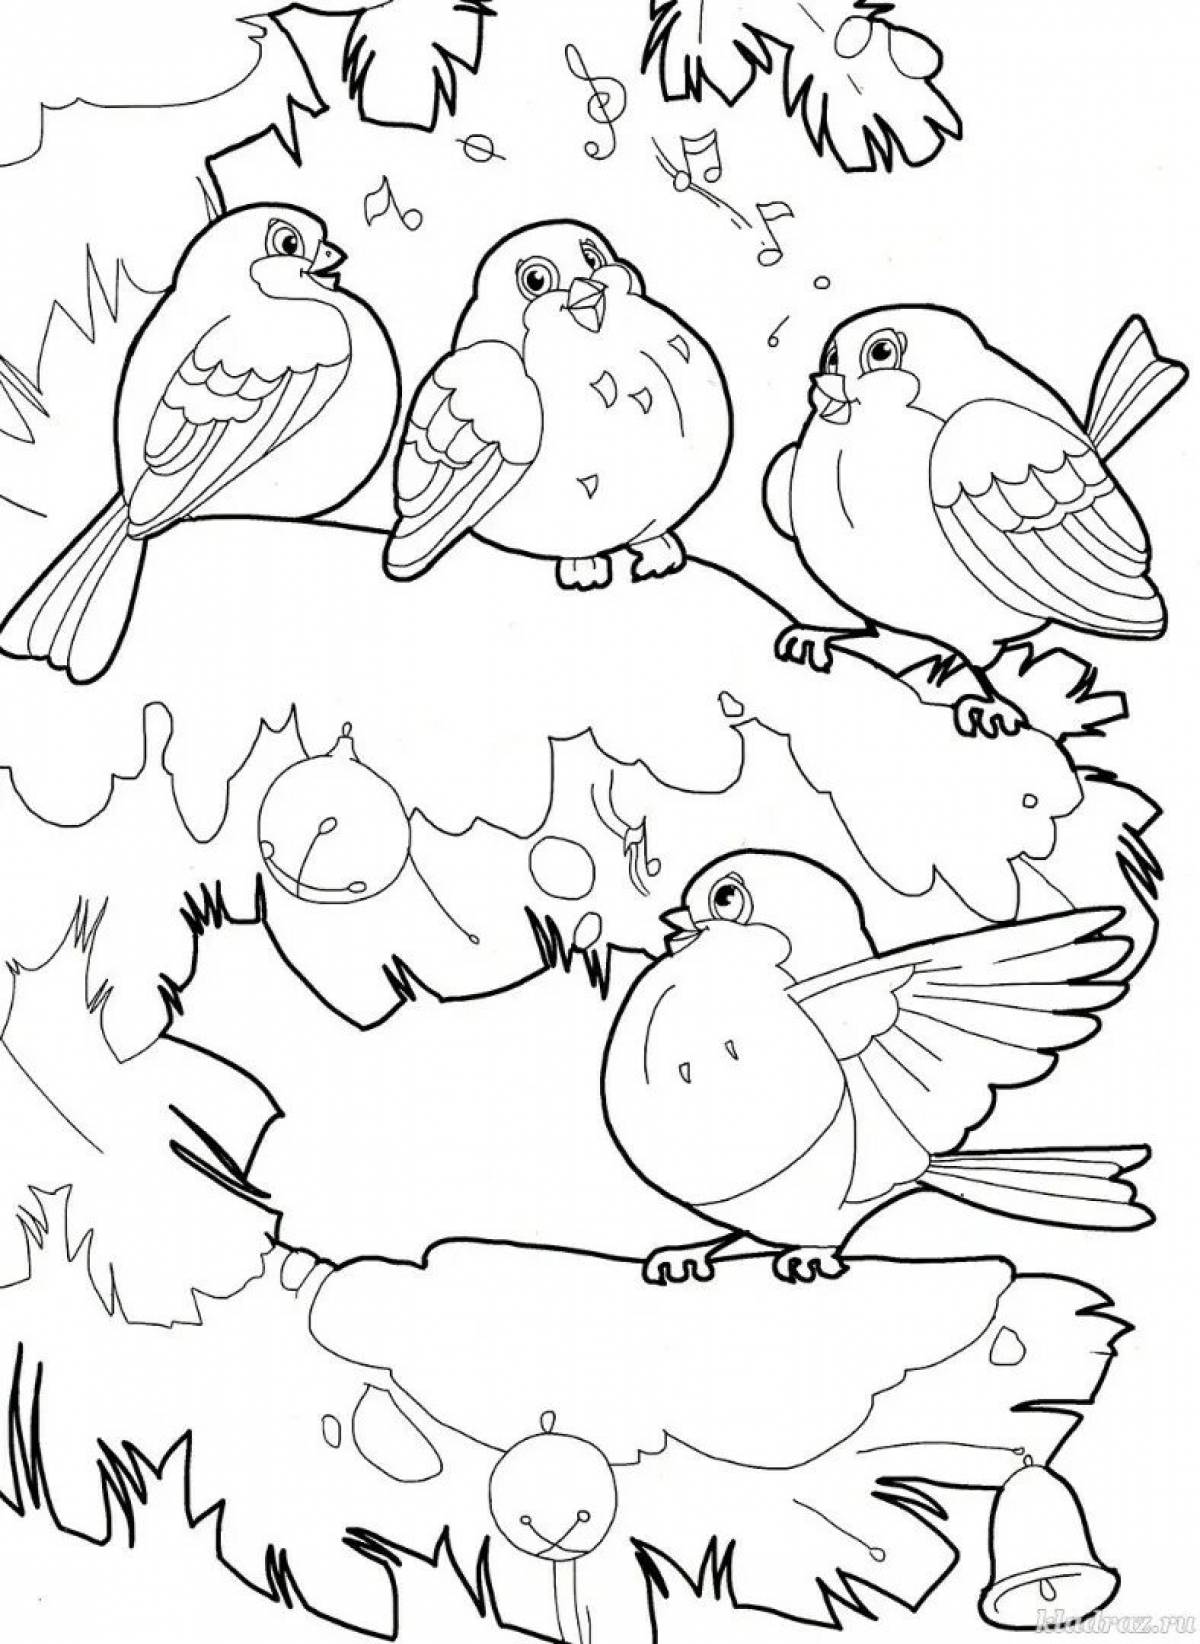 Great winter bird coloring book for 6-7 year olds